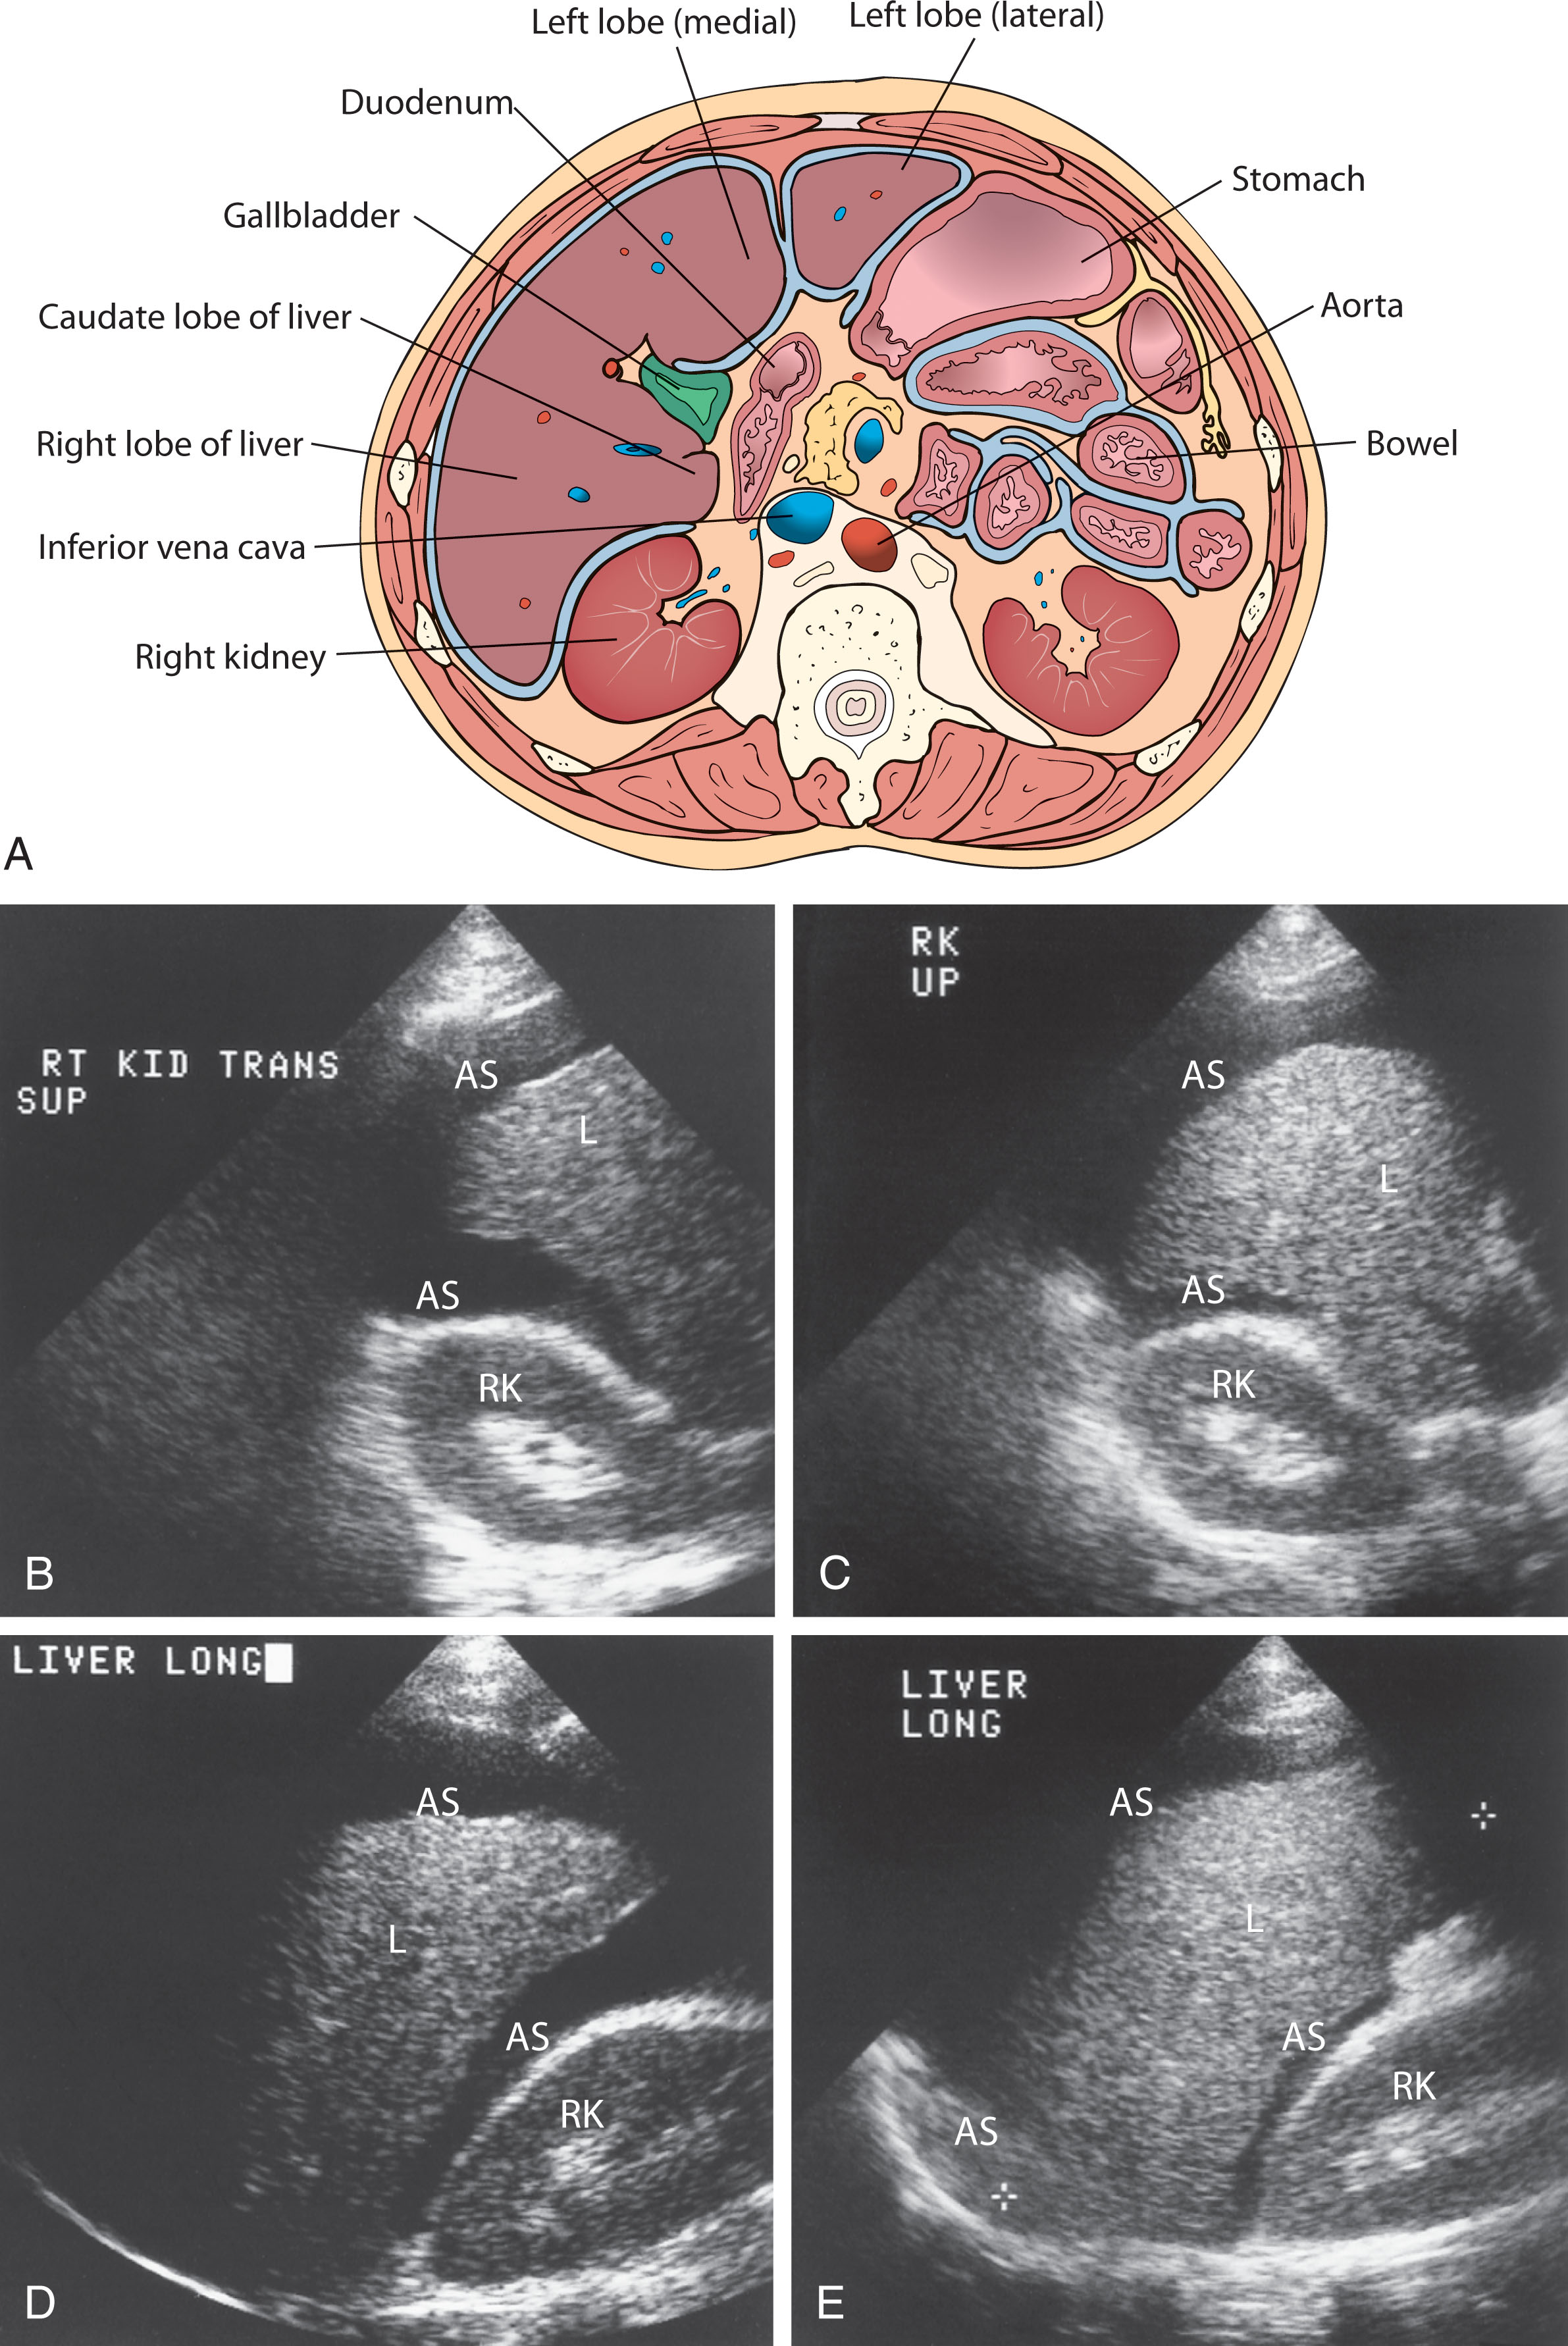 Fig. 14.17, (A) Transverse view of the posterior pararenal space. This space is located between the posterior renal fascia and the transversalis fascia. It communicates with the peritoneal fat, lateral to the lateroconal fascia. The space merges inferiorly with the anterior pararenal space and retroperitoneal tissue of the iliac fossa. Ascites may fill the peritoneal cavity. Small volumes of fluid in the supine position first appear around the inferior tip of the right lobe of the superior portion of the right flank. (B–C) Transverse views show ascitic fluid in the pararenal and subhepatic spaces. (D–E) Longitudinal views with ascitic fluid in the pararenal space (Morison’s pouch) and subhepatic space. AS , Ascites; L , liver; RK , right kidney.